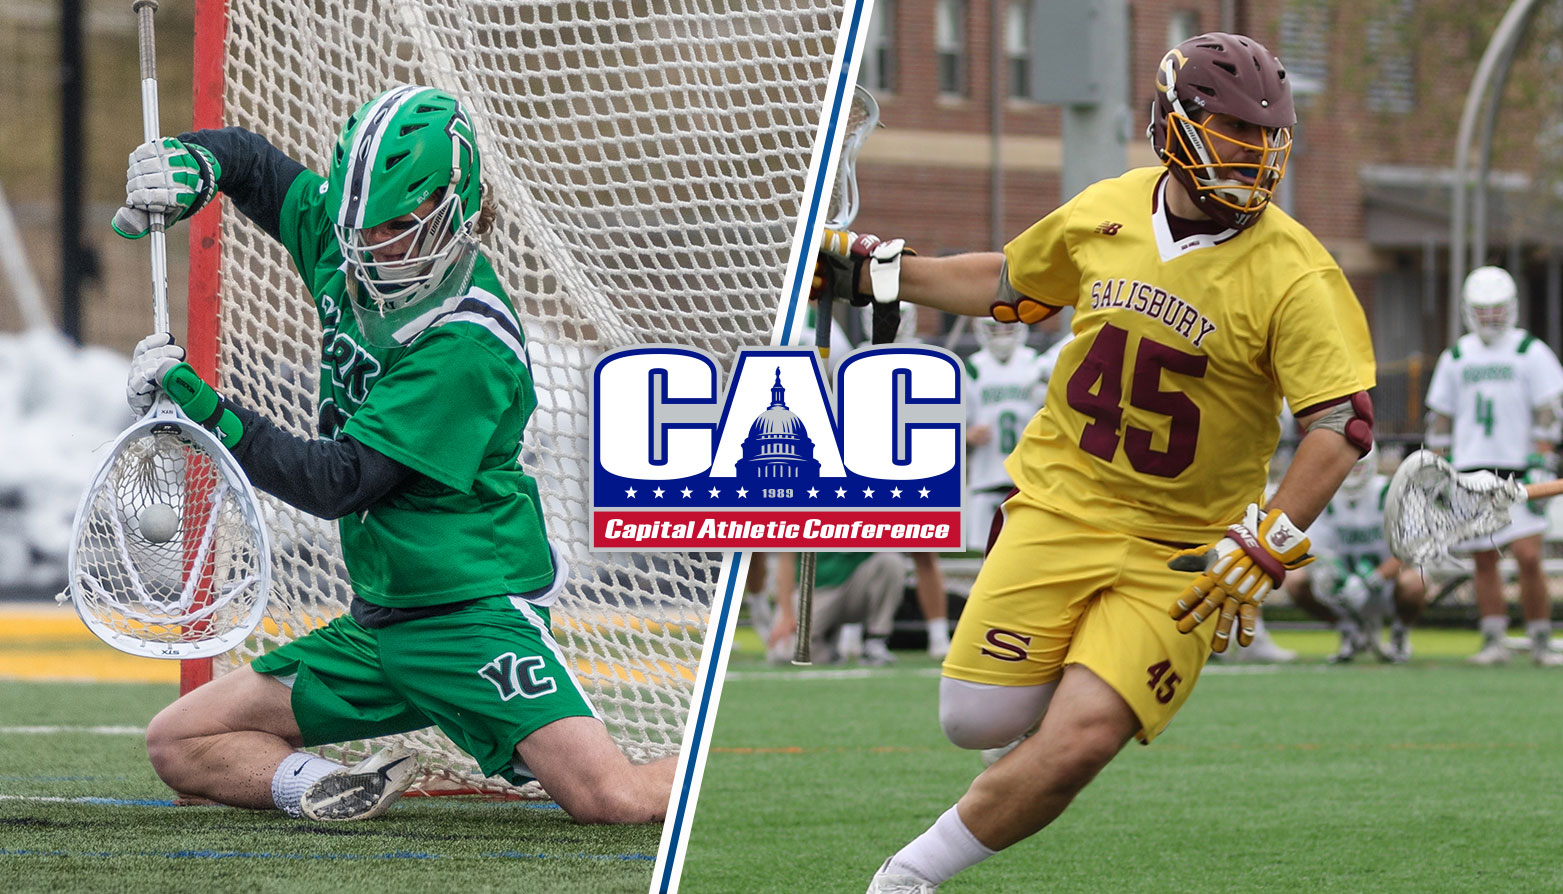 Salisbury's Malamphy Named CAC Men's Lacrosse Player of the Year; York's Michael & Childs Collect Major Awards